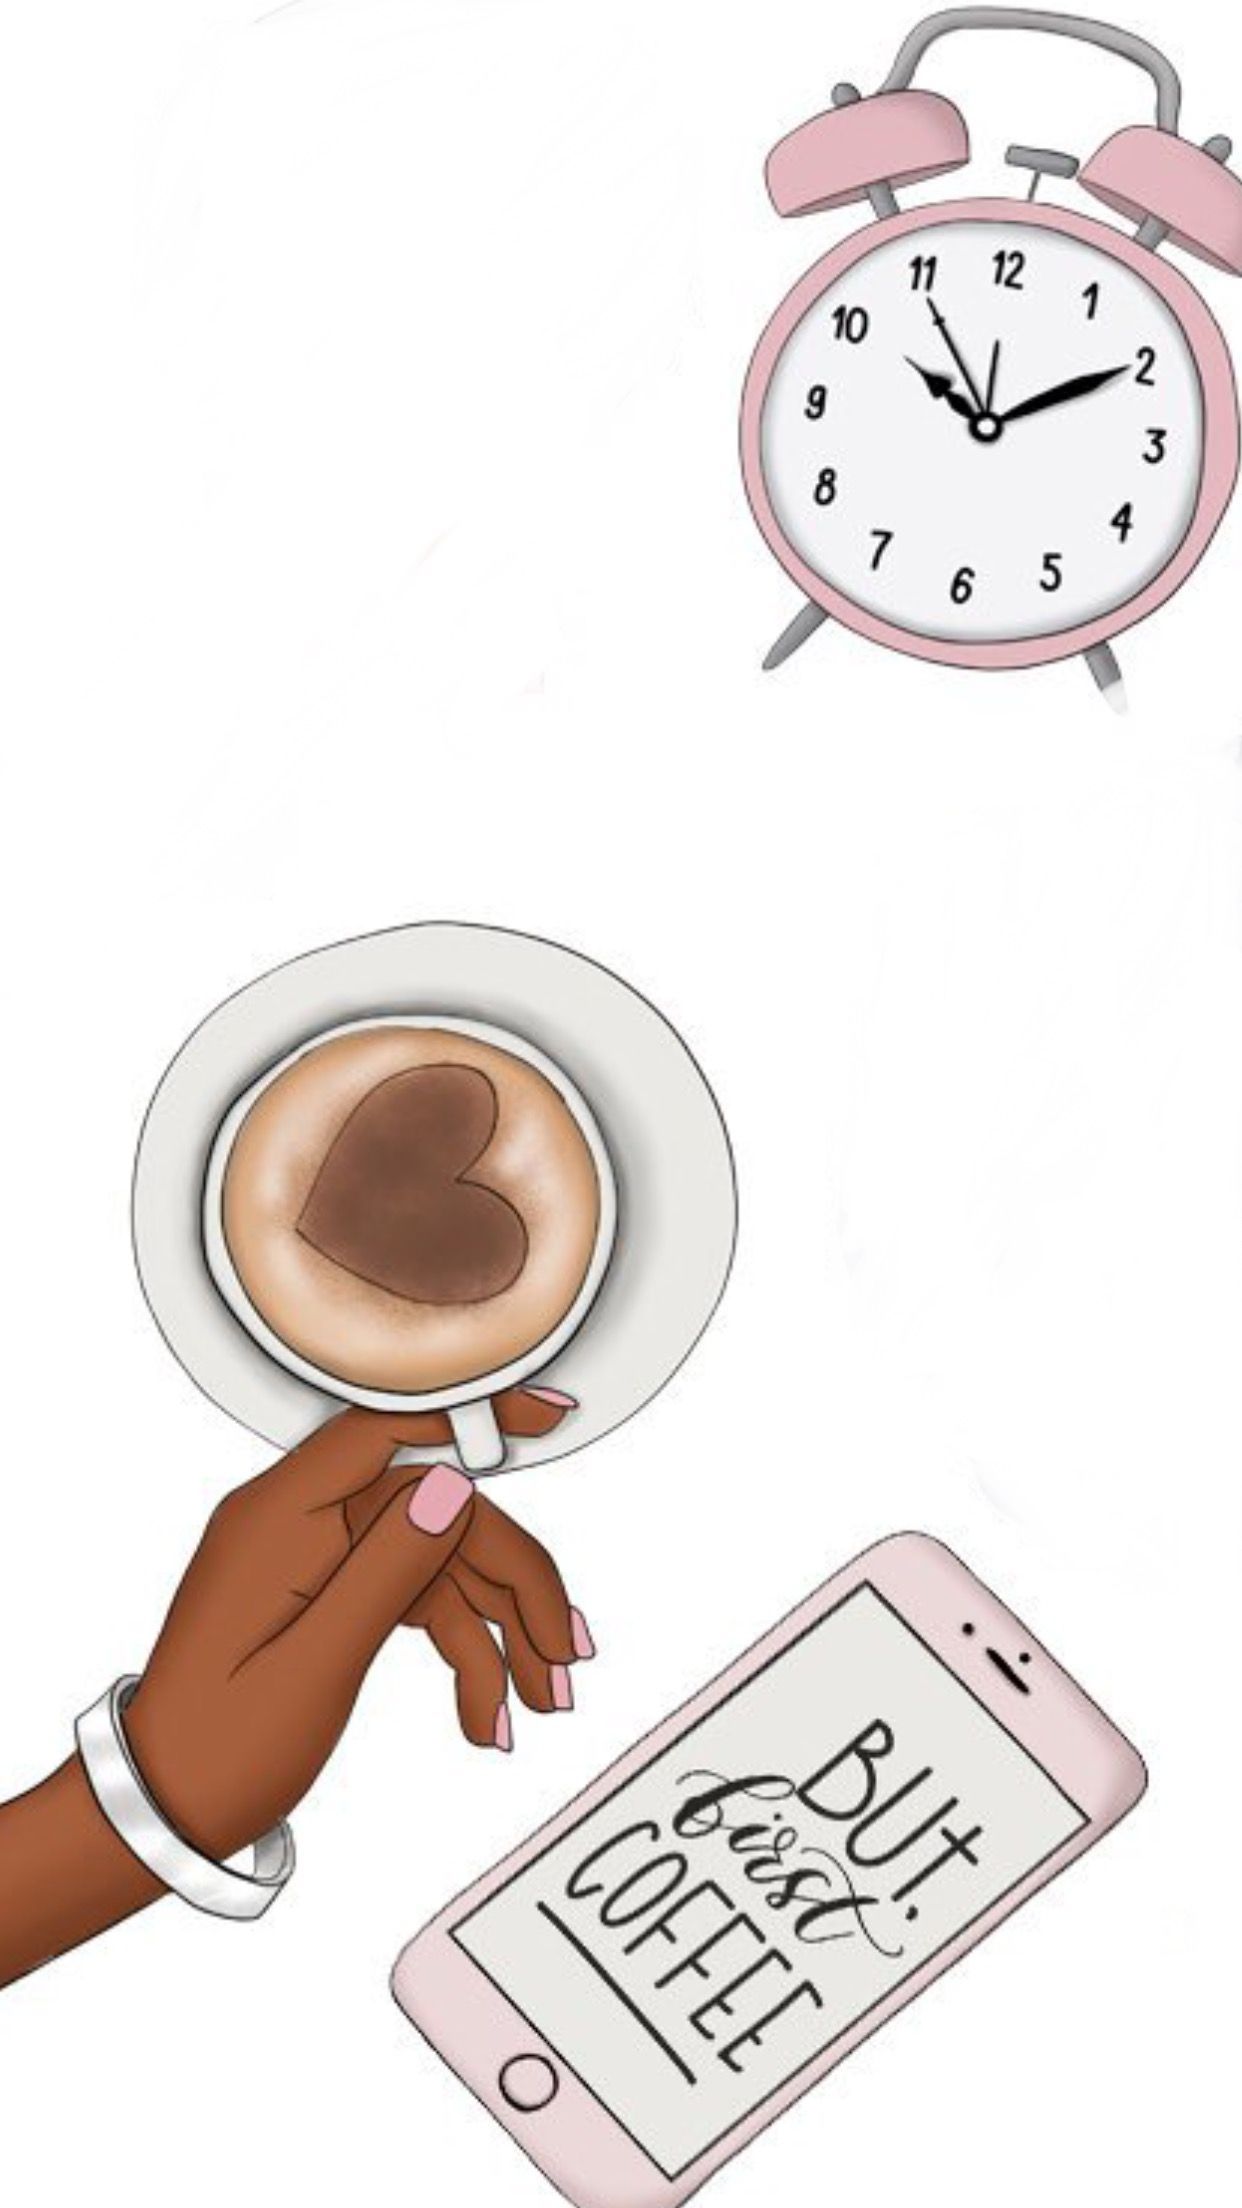 After Morning Devotions That Is ;). iPhone wallpaper, Coffee art, Black girl art